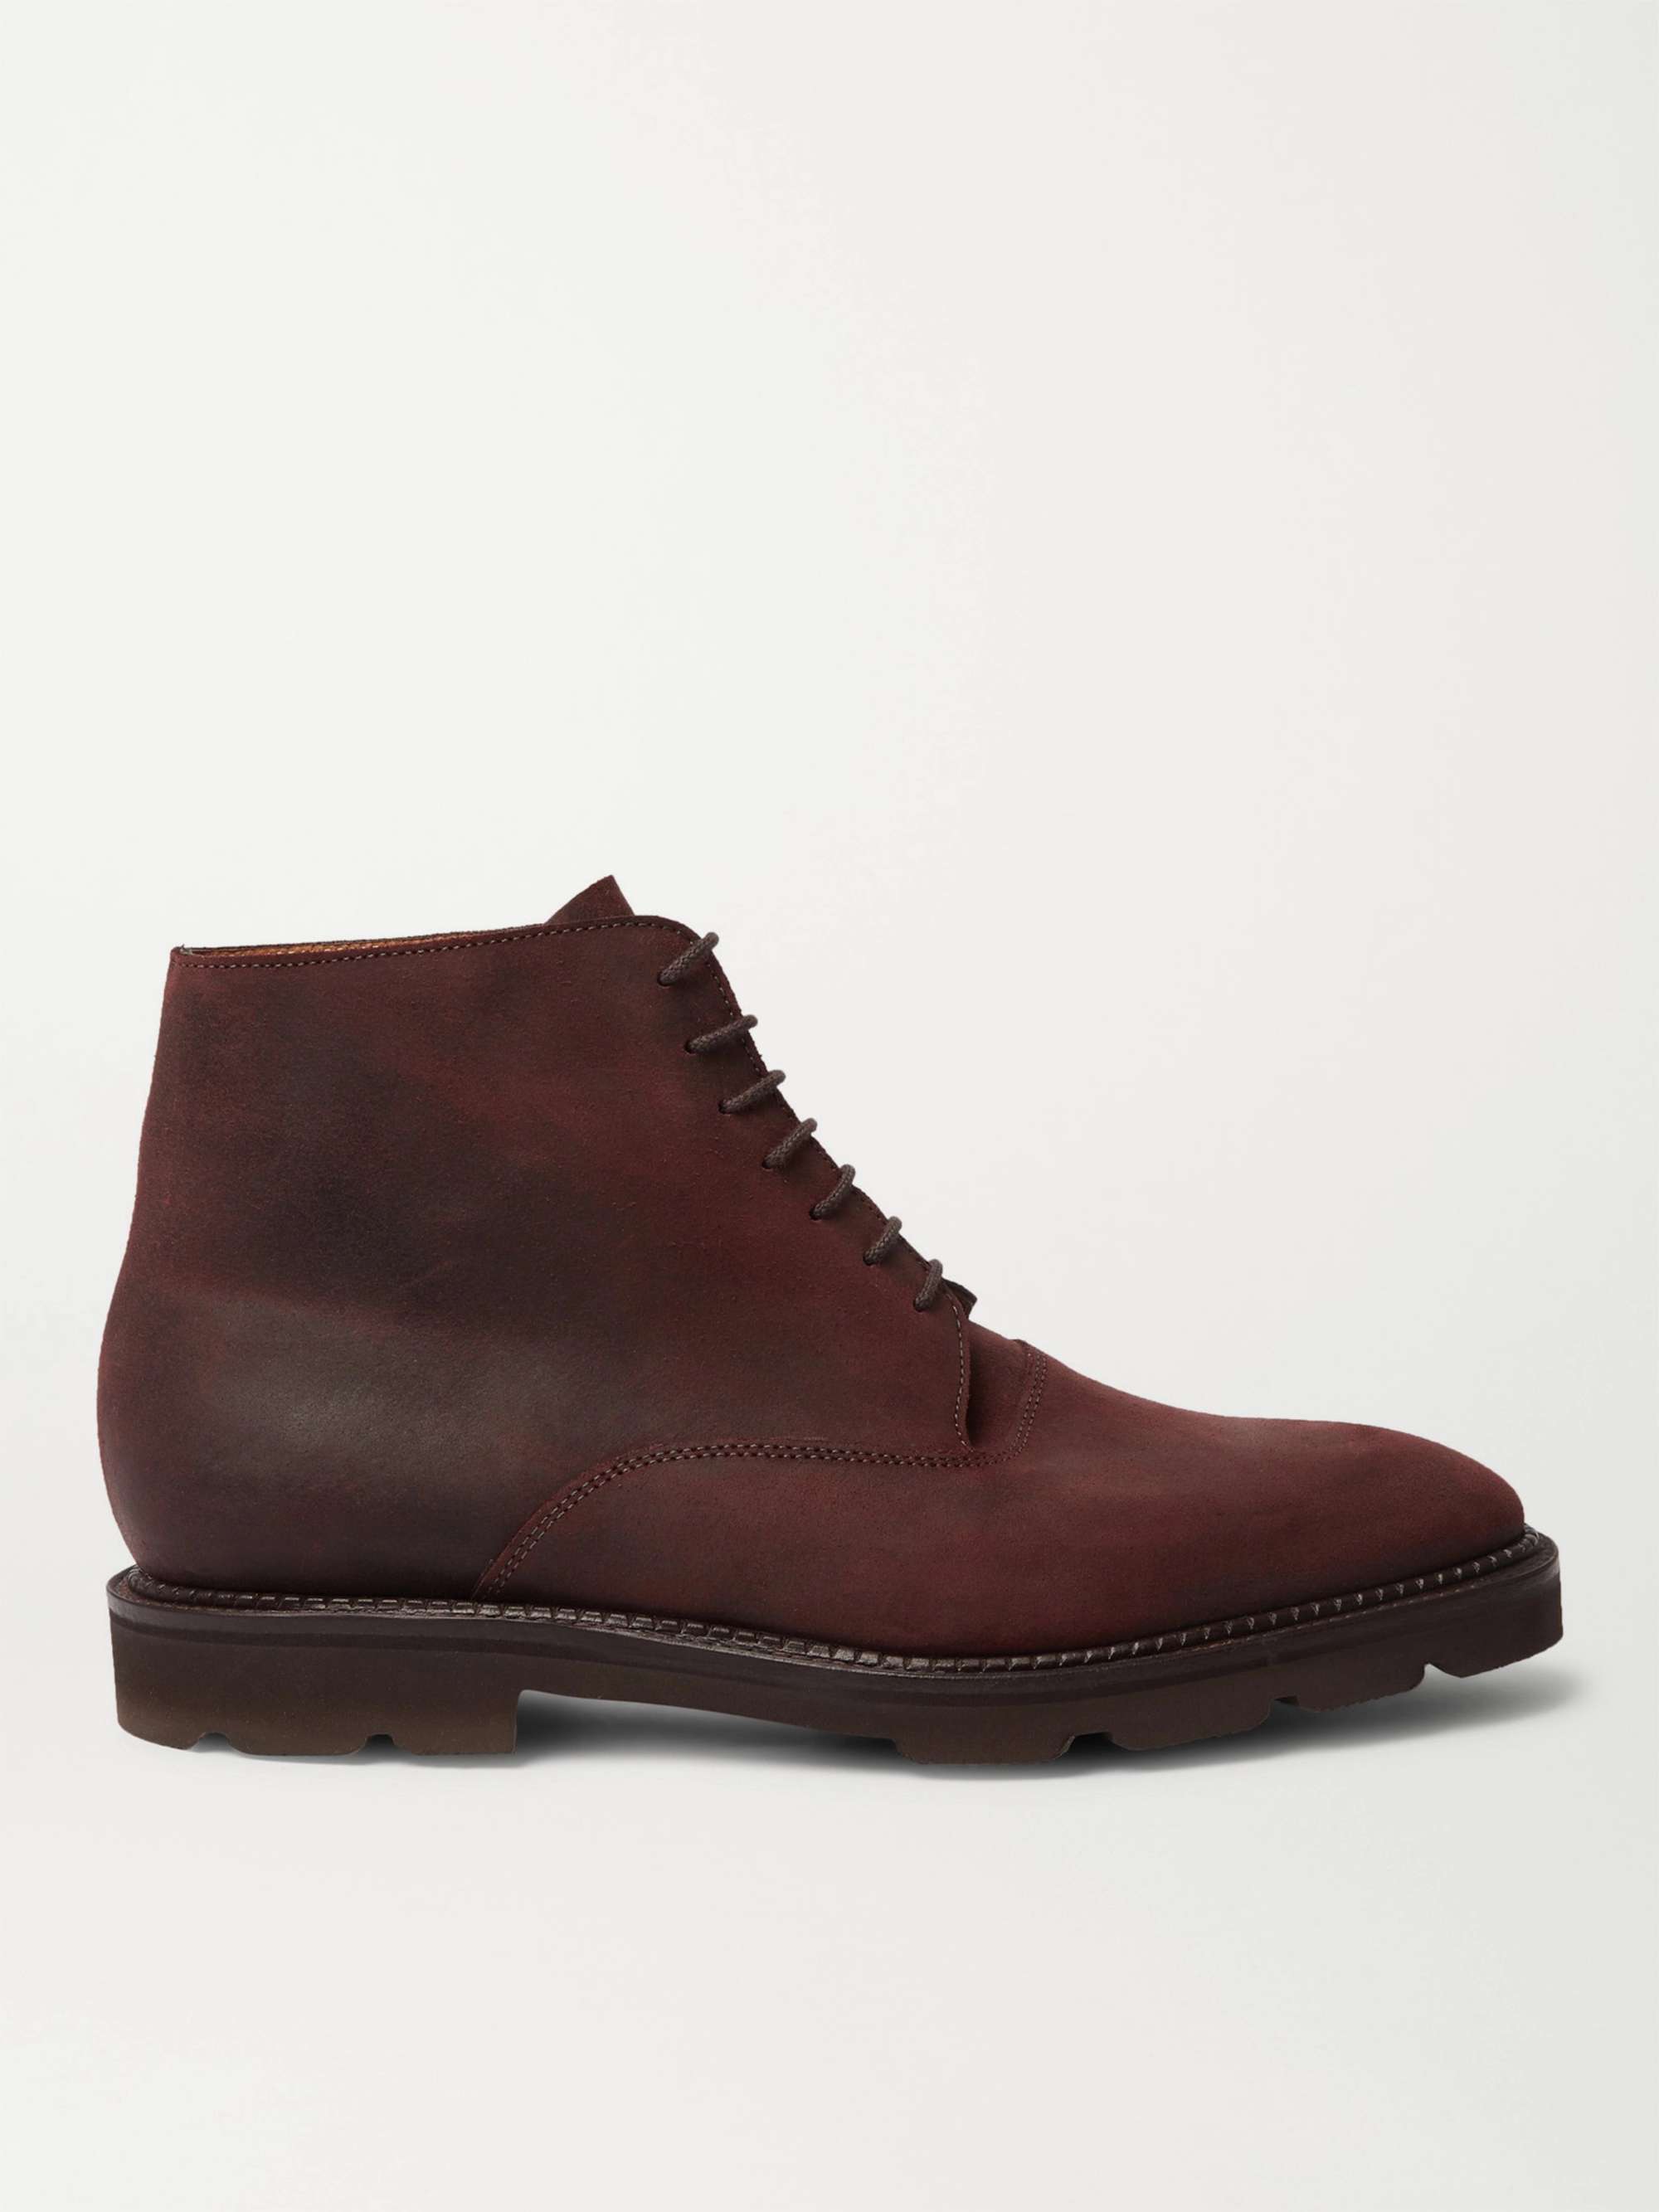 JOHN LOBB Forge Waxed-Suede Oxford Boots